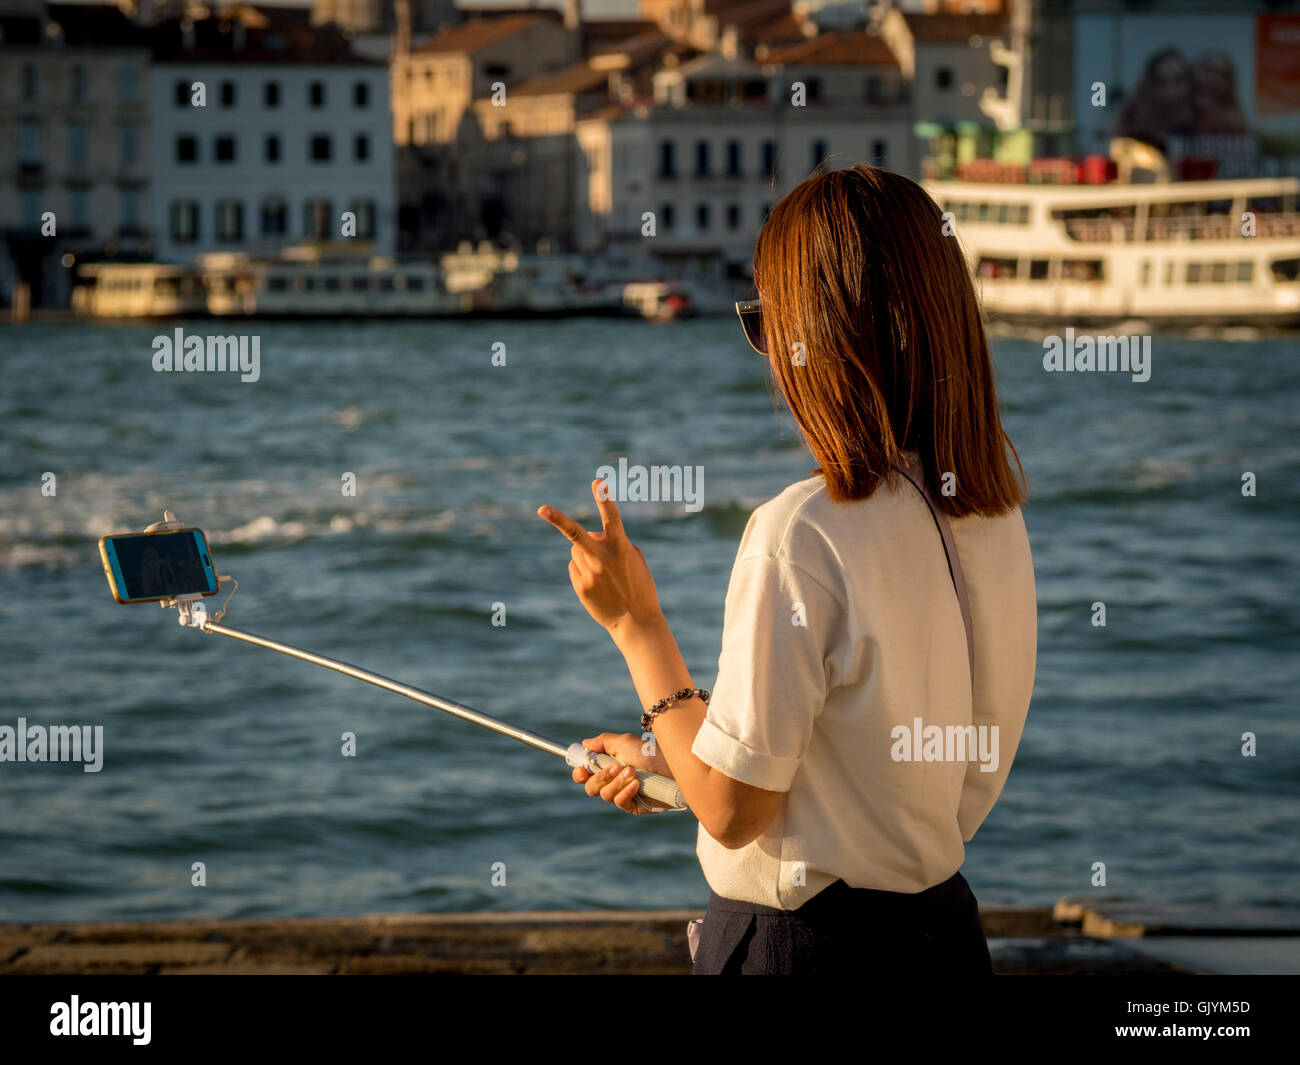 Young Asian adult female tourist taking a selfie, using a selfie stick; making the V sign with her fingers. Venice, Italy. Stock Photo